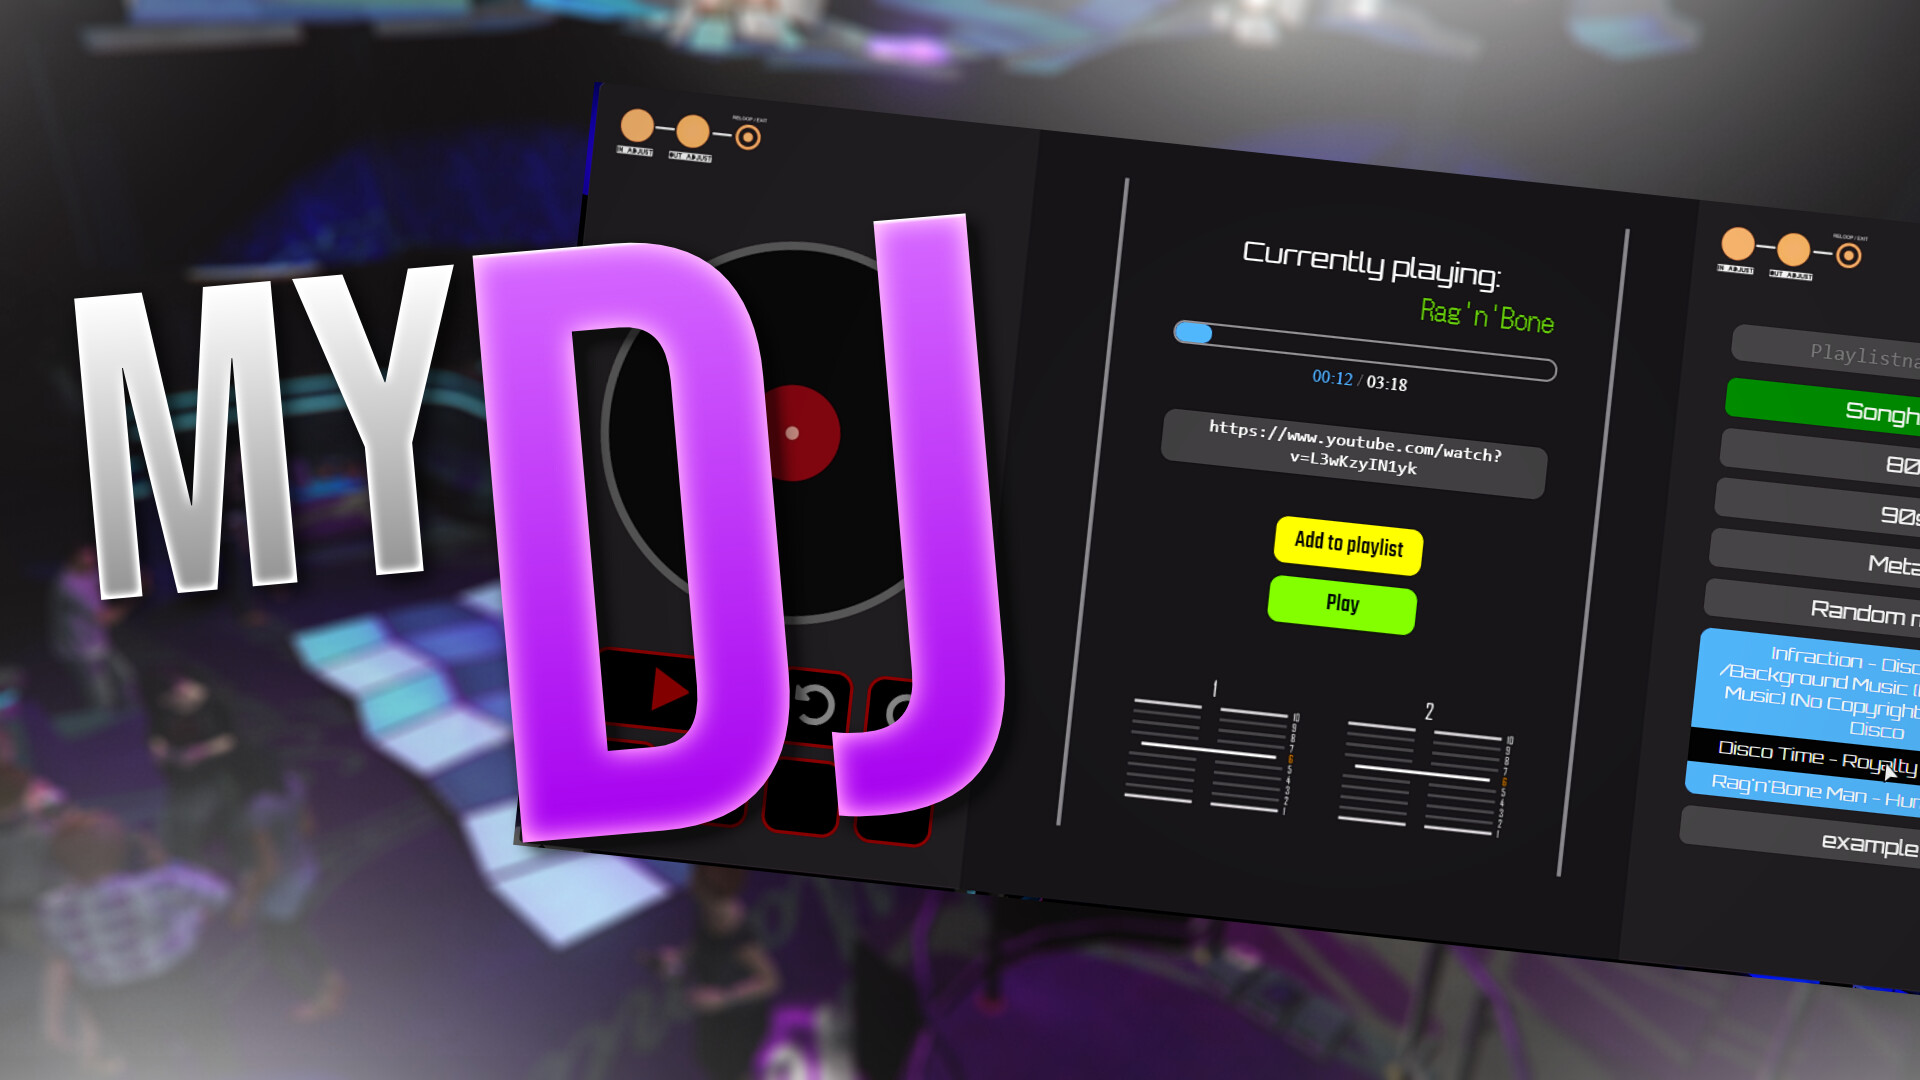 myDJ - synchronized music, playlists with autoplay and more for your party!  - Releases  Community